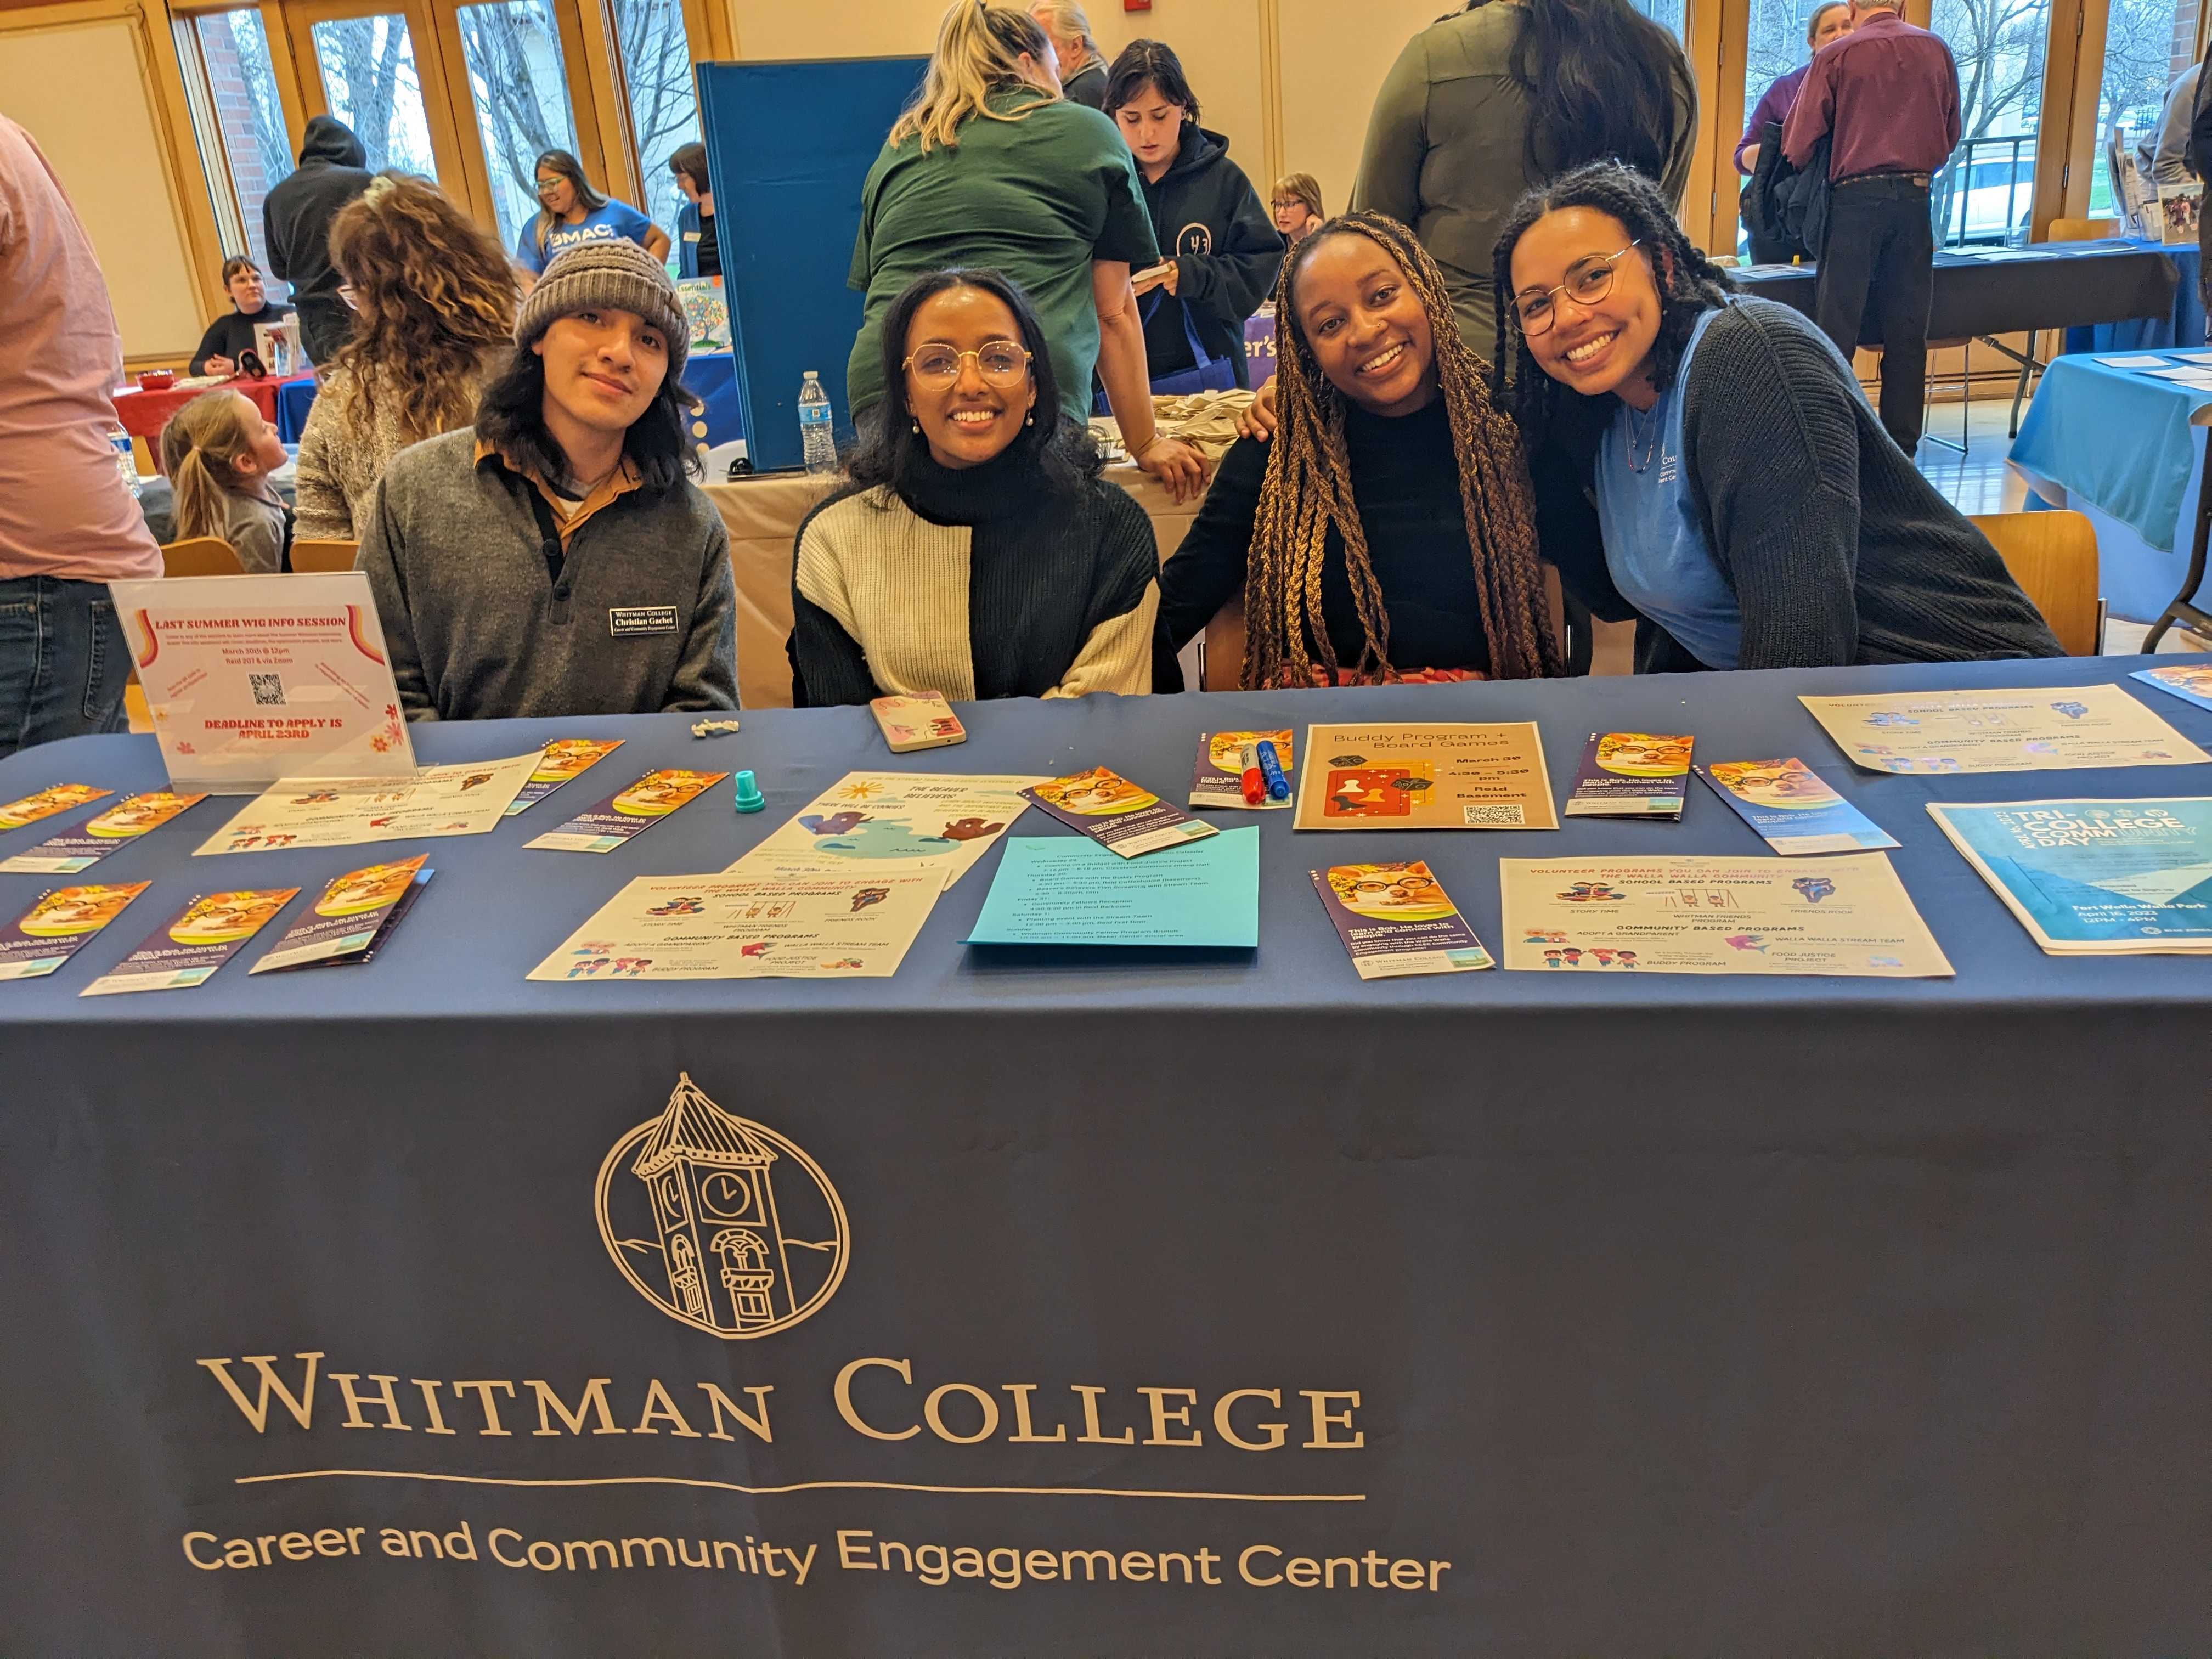 Student volunteers sitting behind a table with a table cloth on top that says Whitman College Career and Community Engagement Center